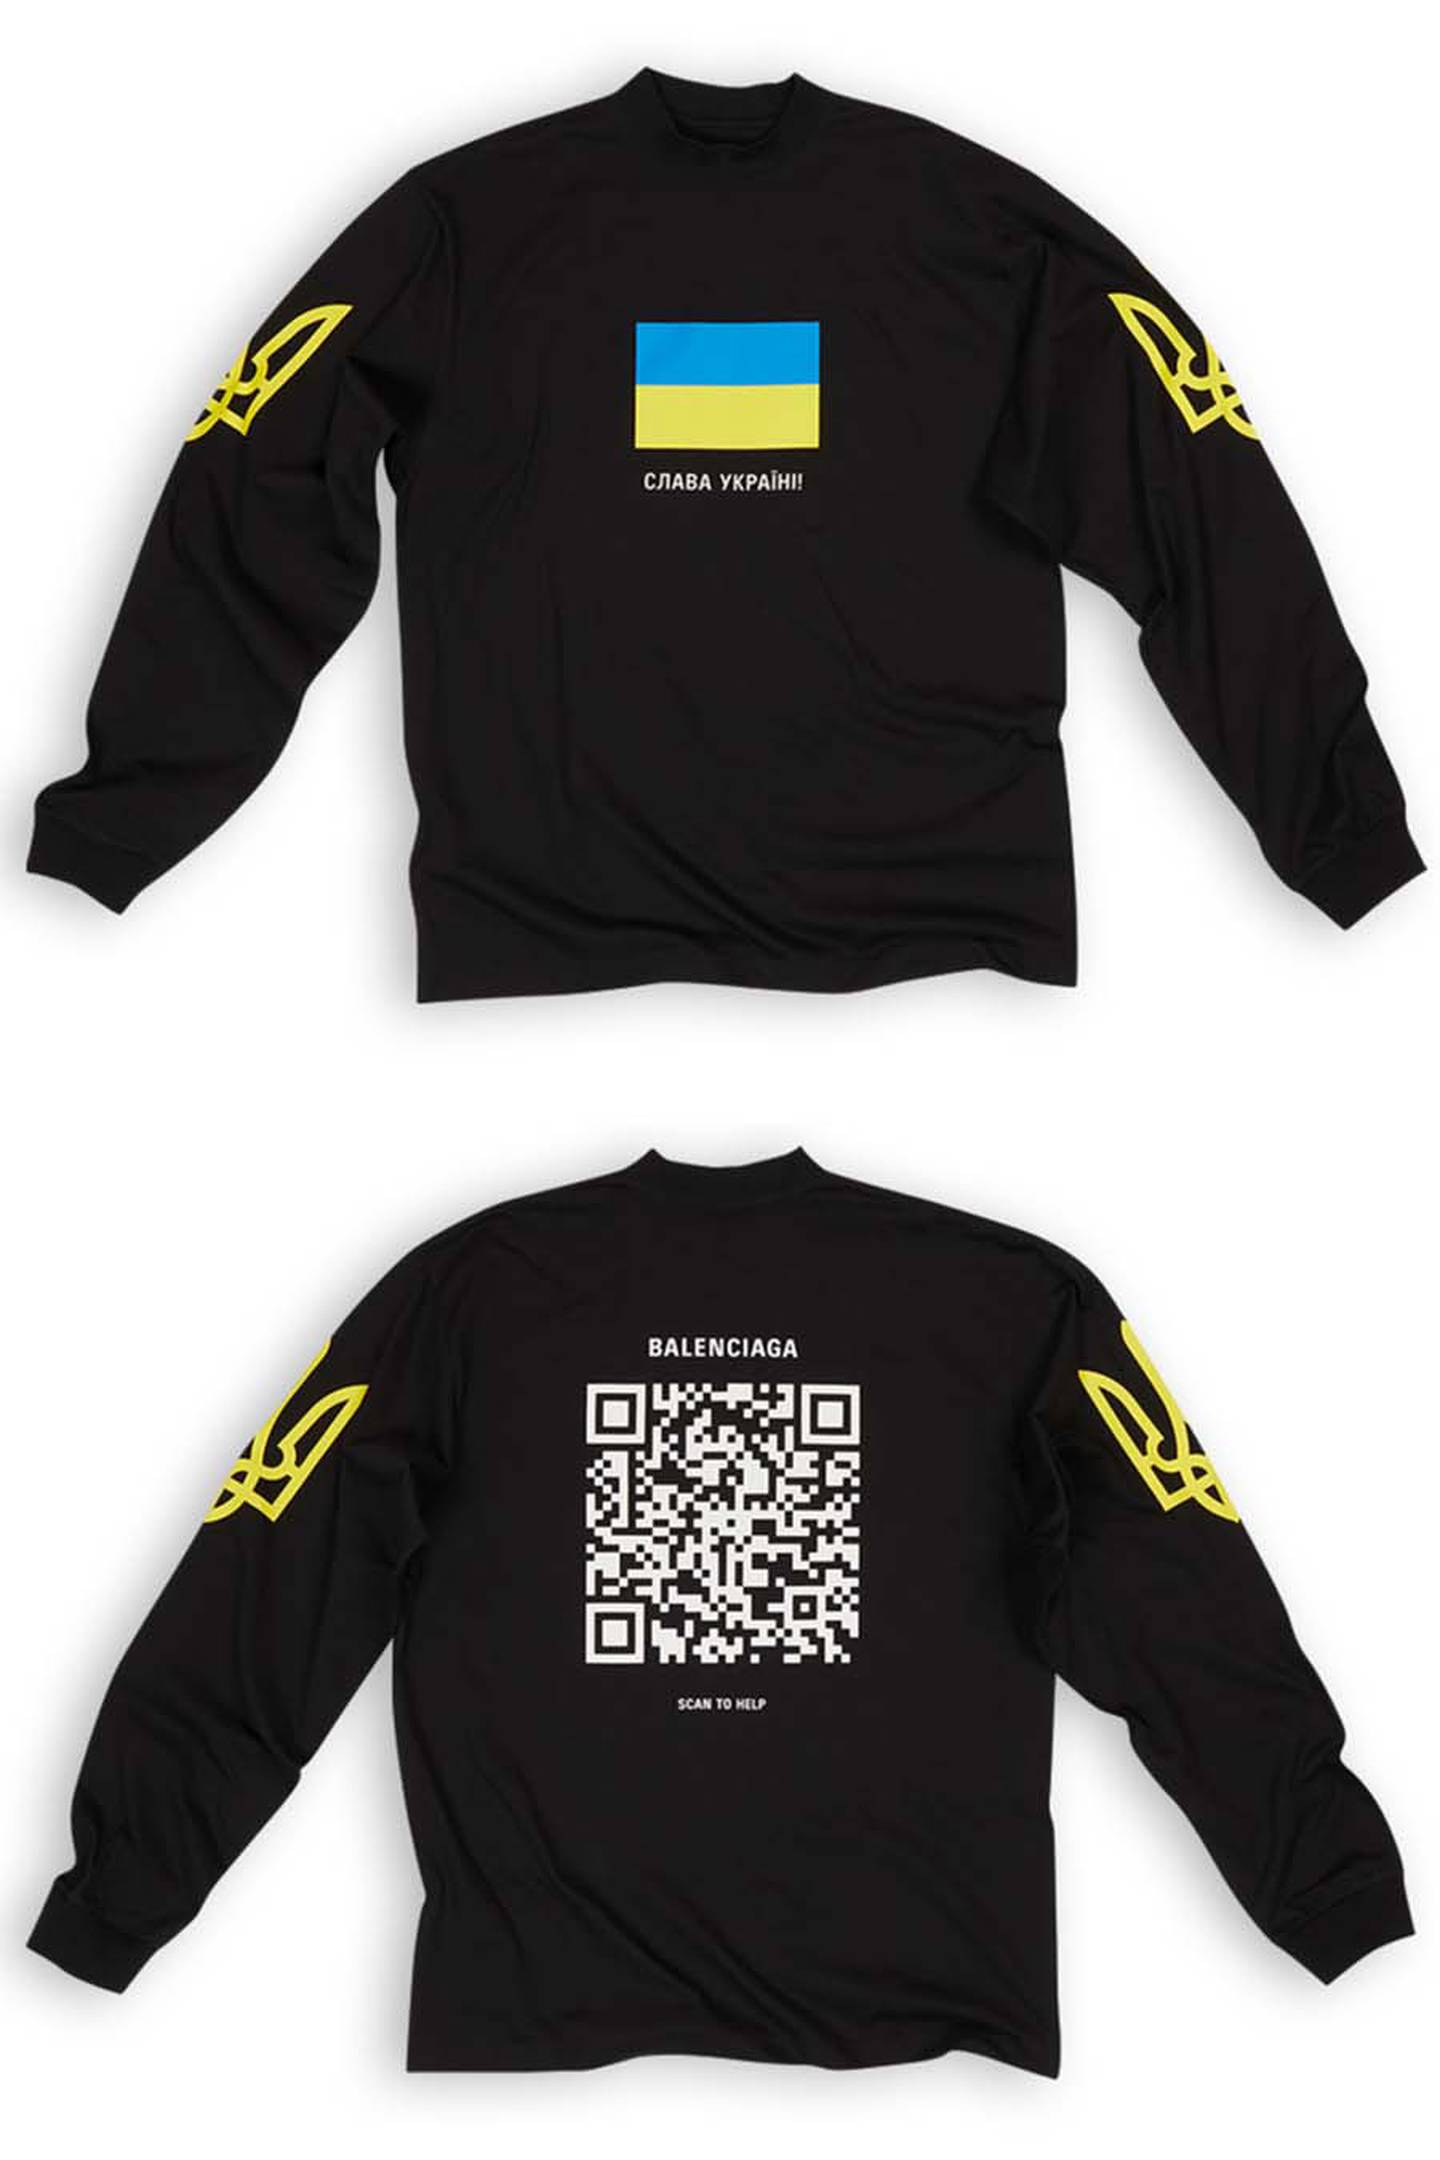 Balenciaga will release a t-shirt Thursday to raise money and awareness for United24’s Rebuild Ukraine fund.